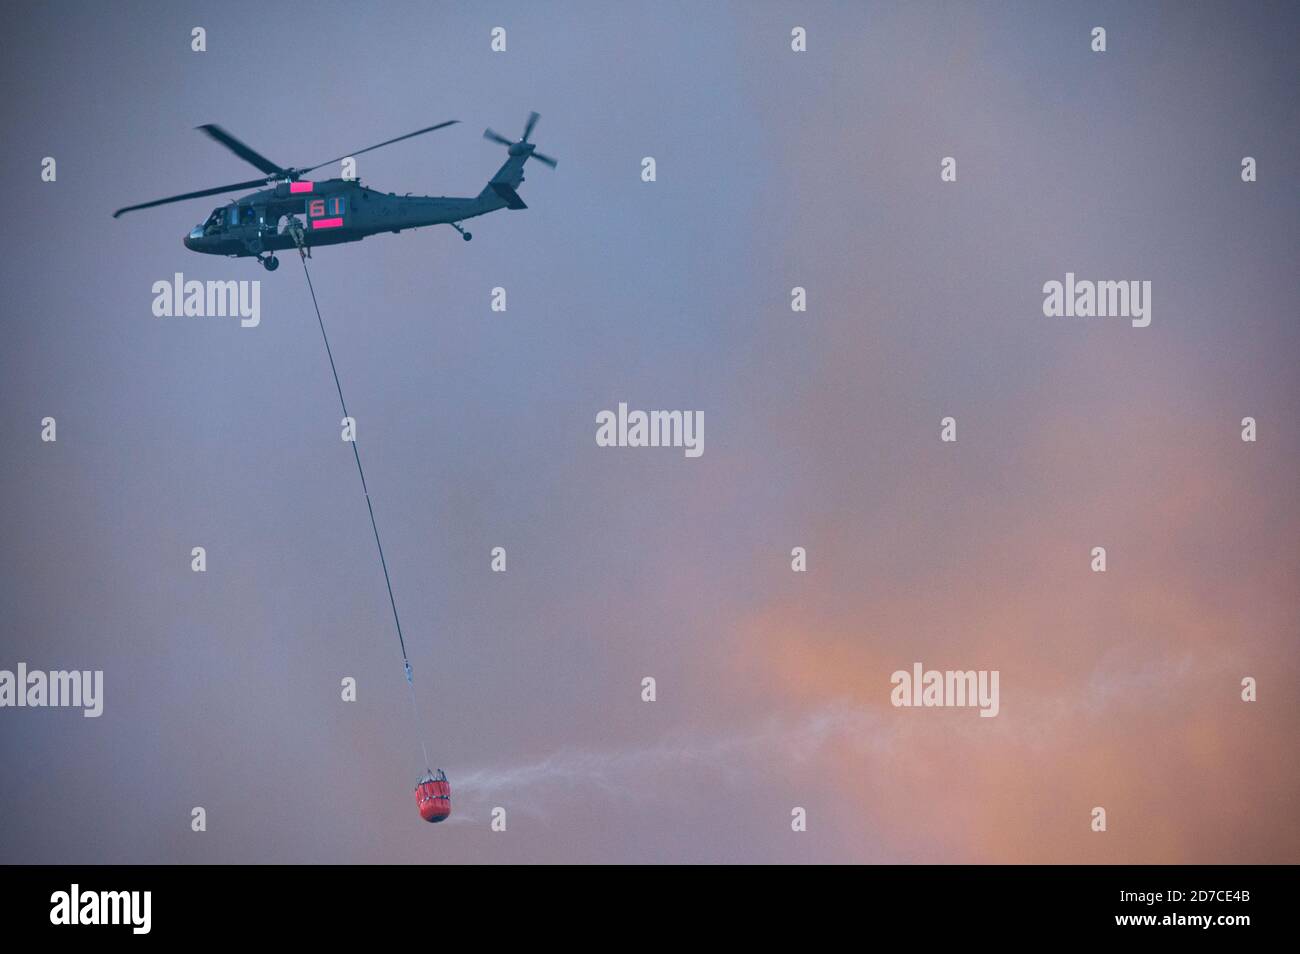 Aerial firefighting helicopter with fire bucket flying into smoke to drop water on wildfire Stock Photo